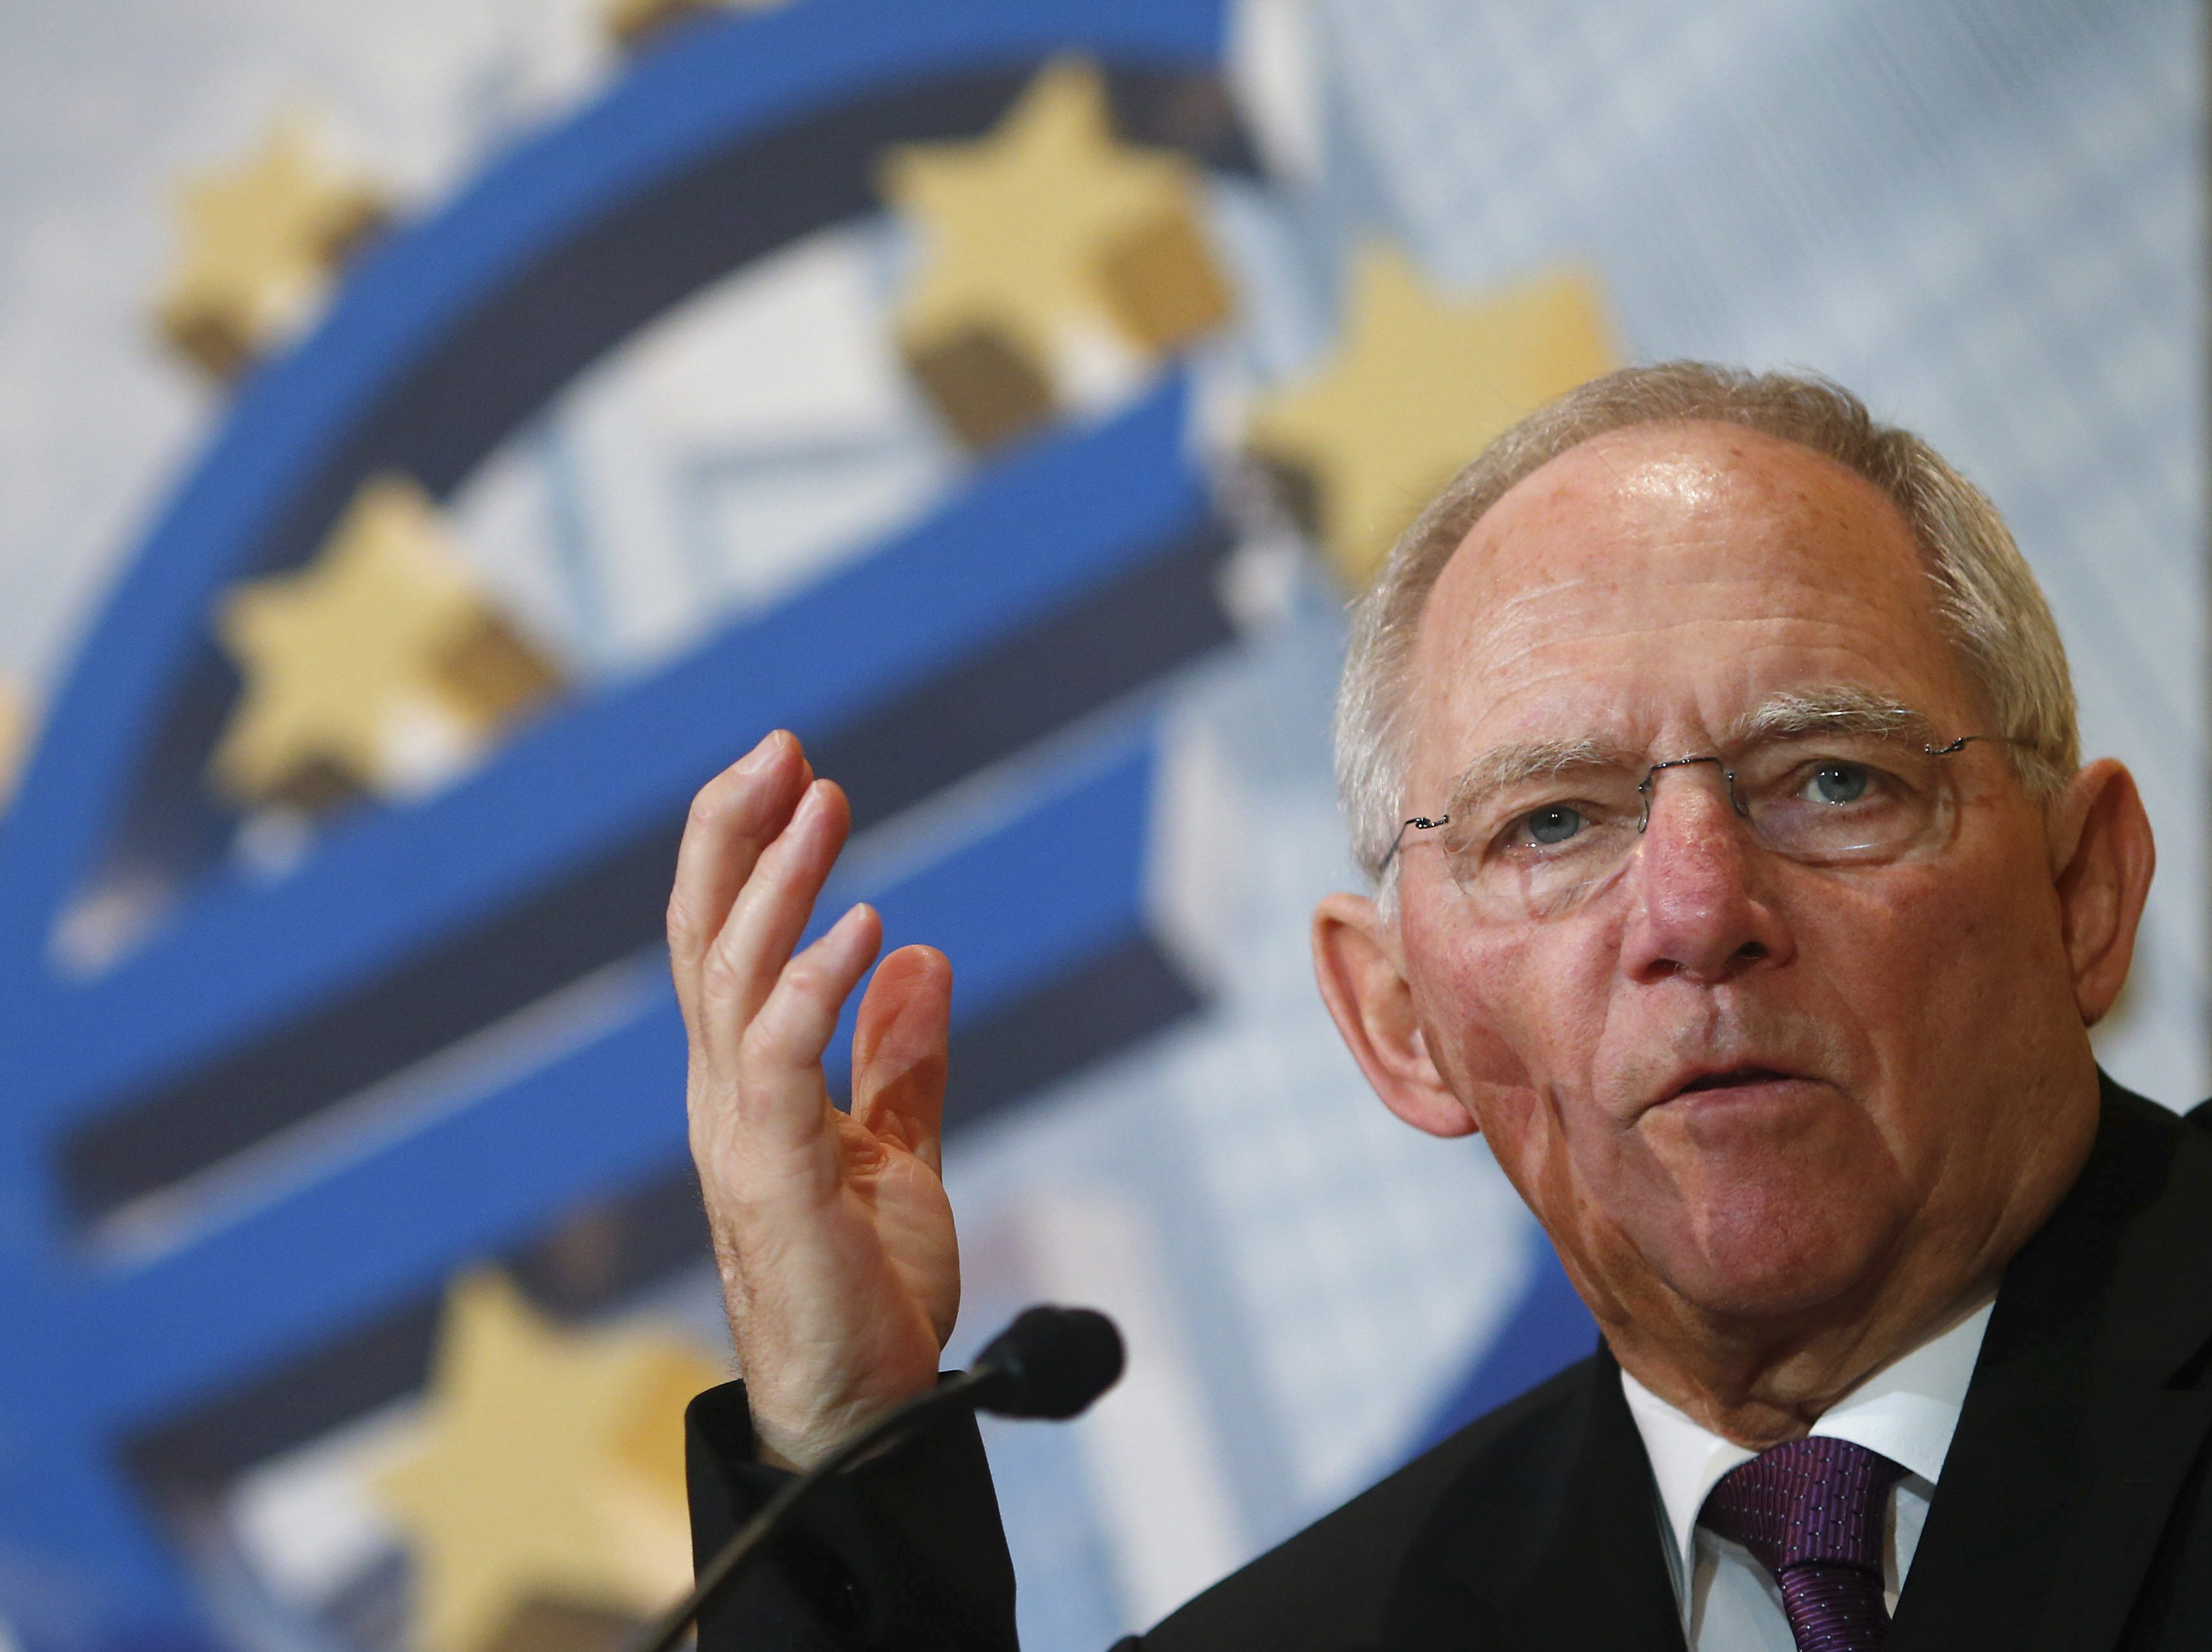 Wolfgang Schäuble: “A Greek politician proposed the Grexit”